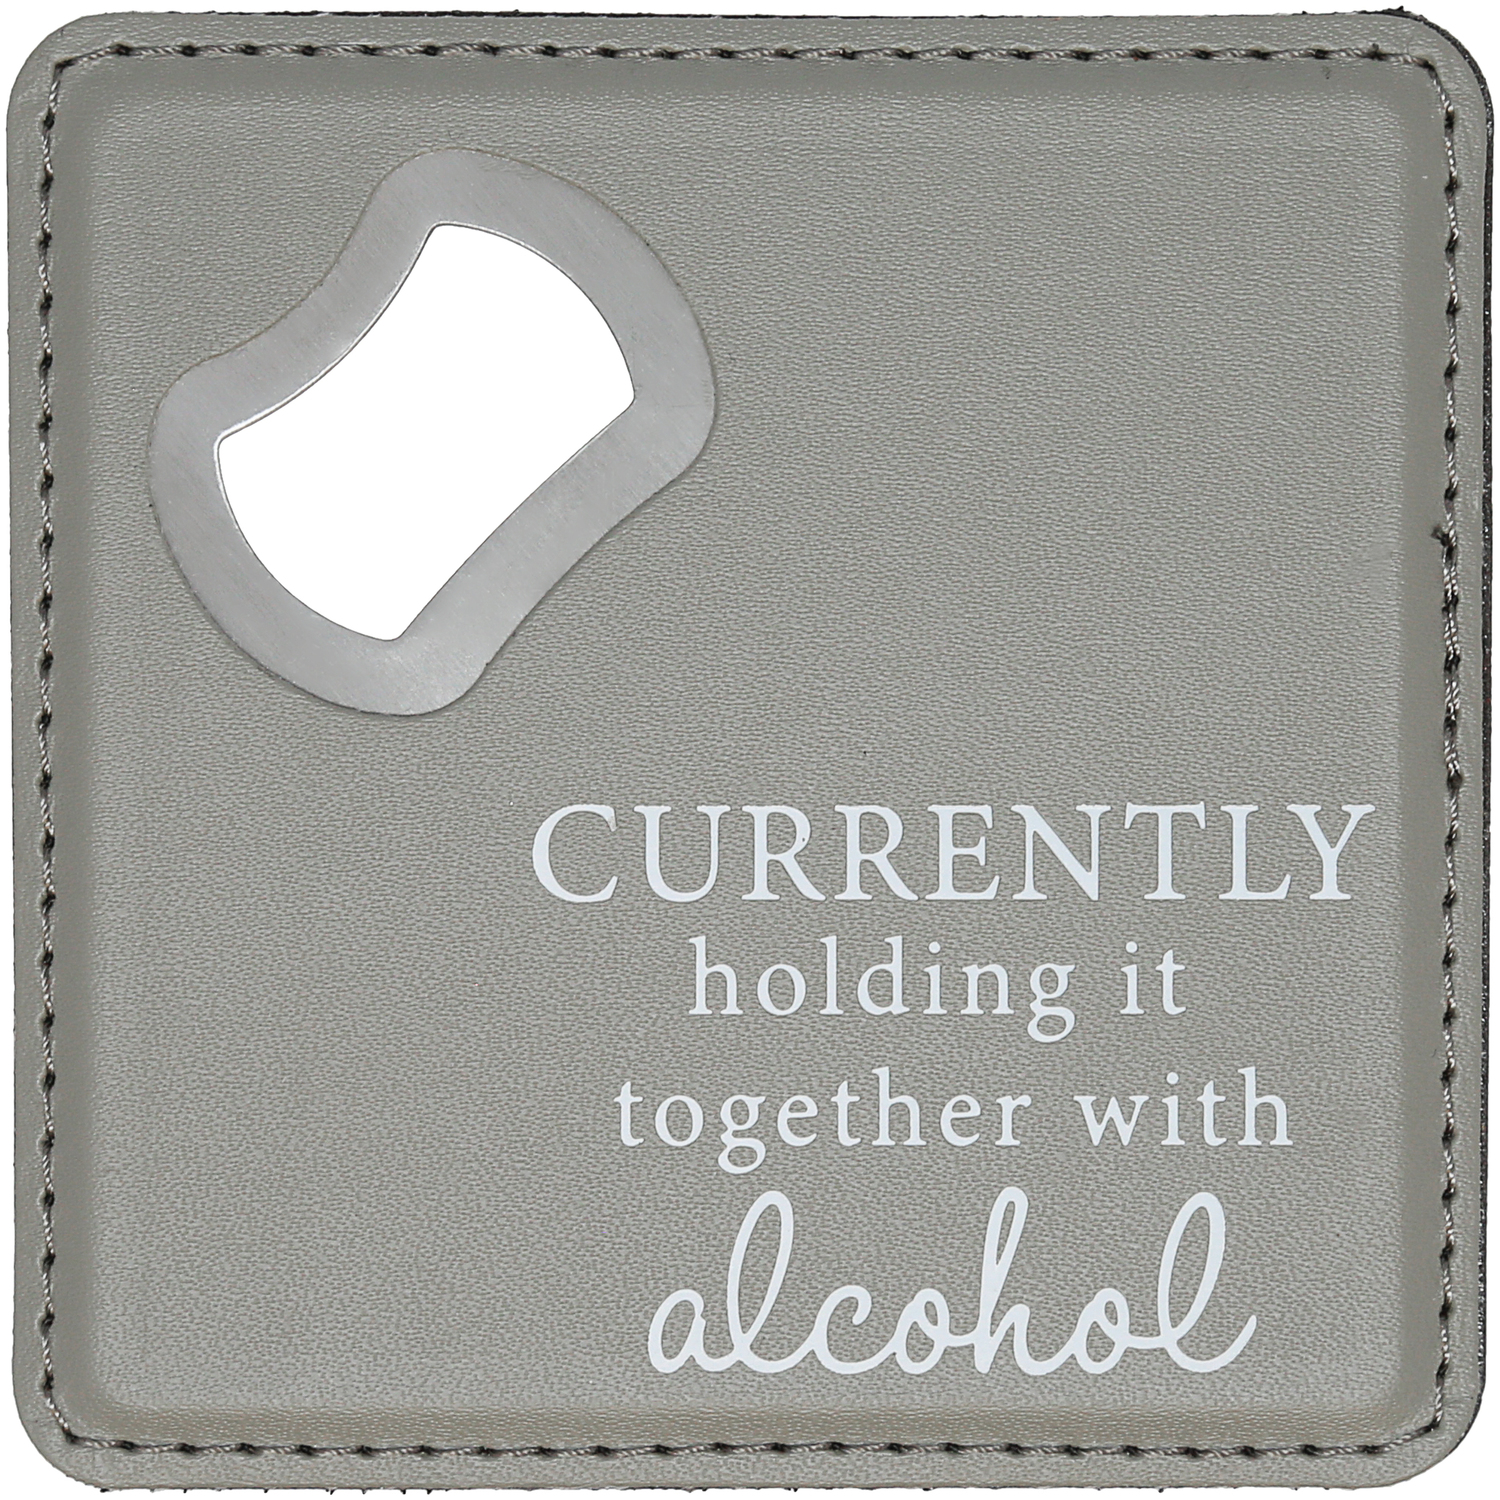 Holding It Together by A-Parent-ly - Holding It Together - 4" x 4" Bottle Opener Coaster